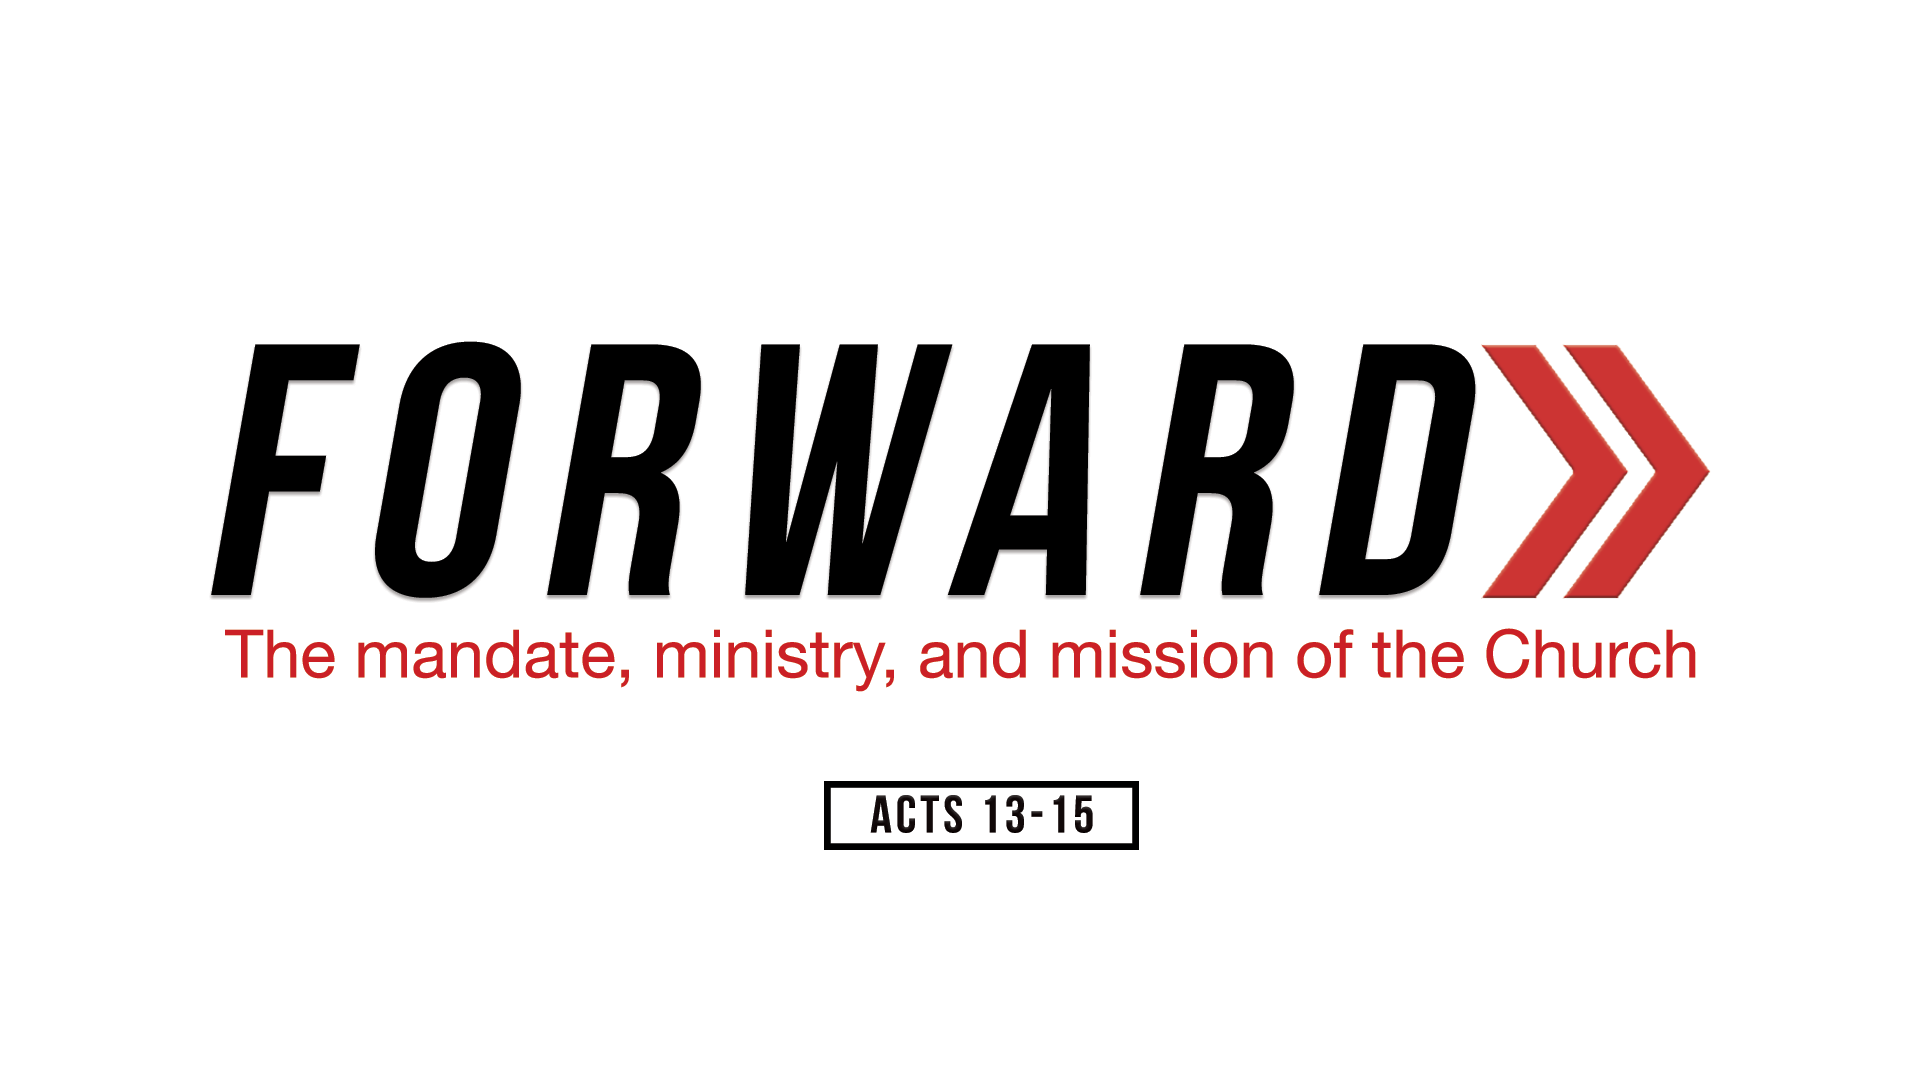 Featured image for “Forward”